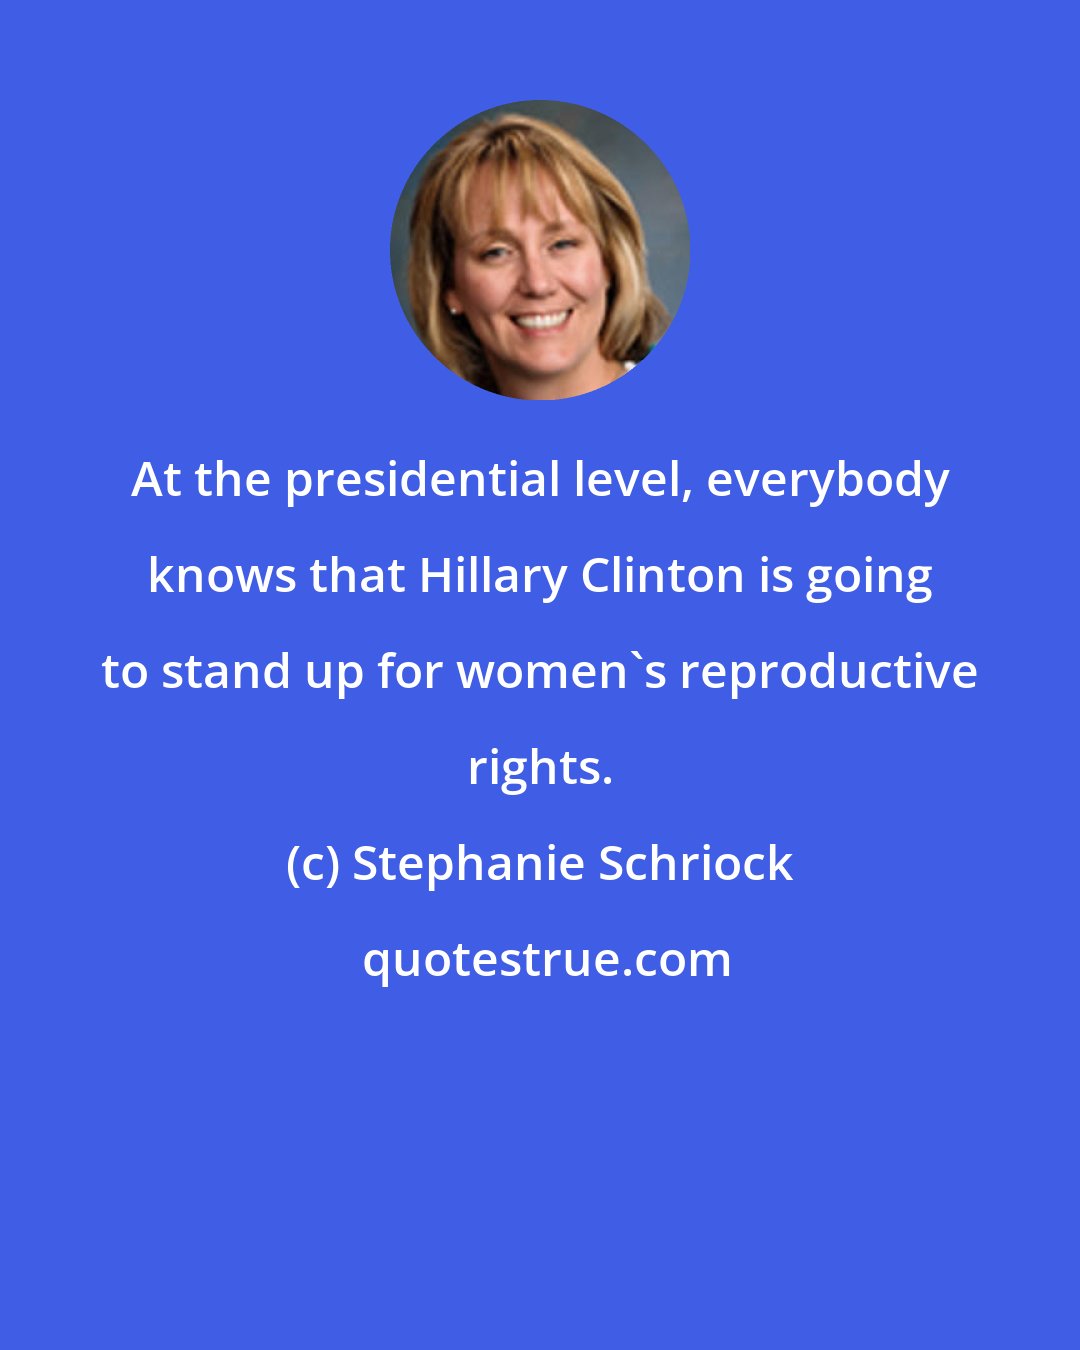 Stephanie Schriock: At the presidential level, everybody knows that Hillary Clinton is going to stand up for women's reproductive rights.